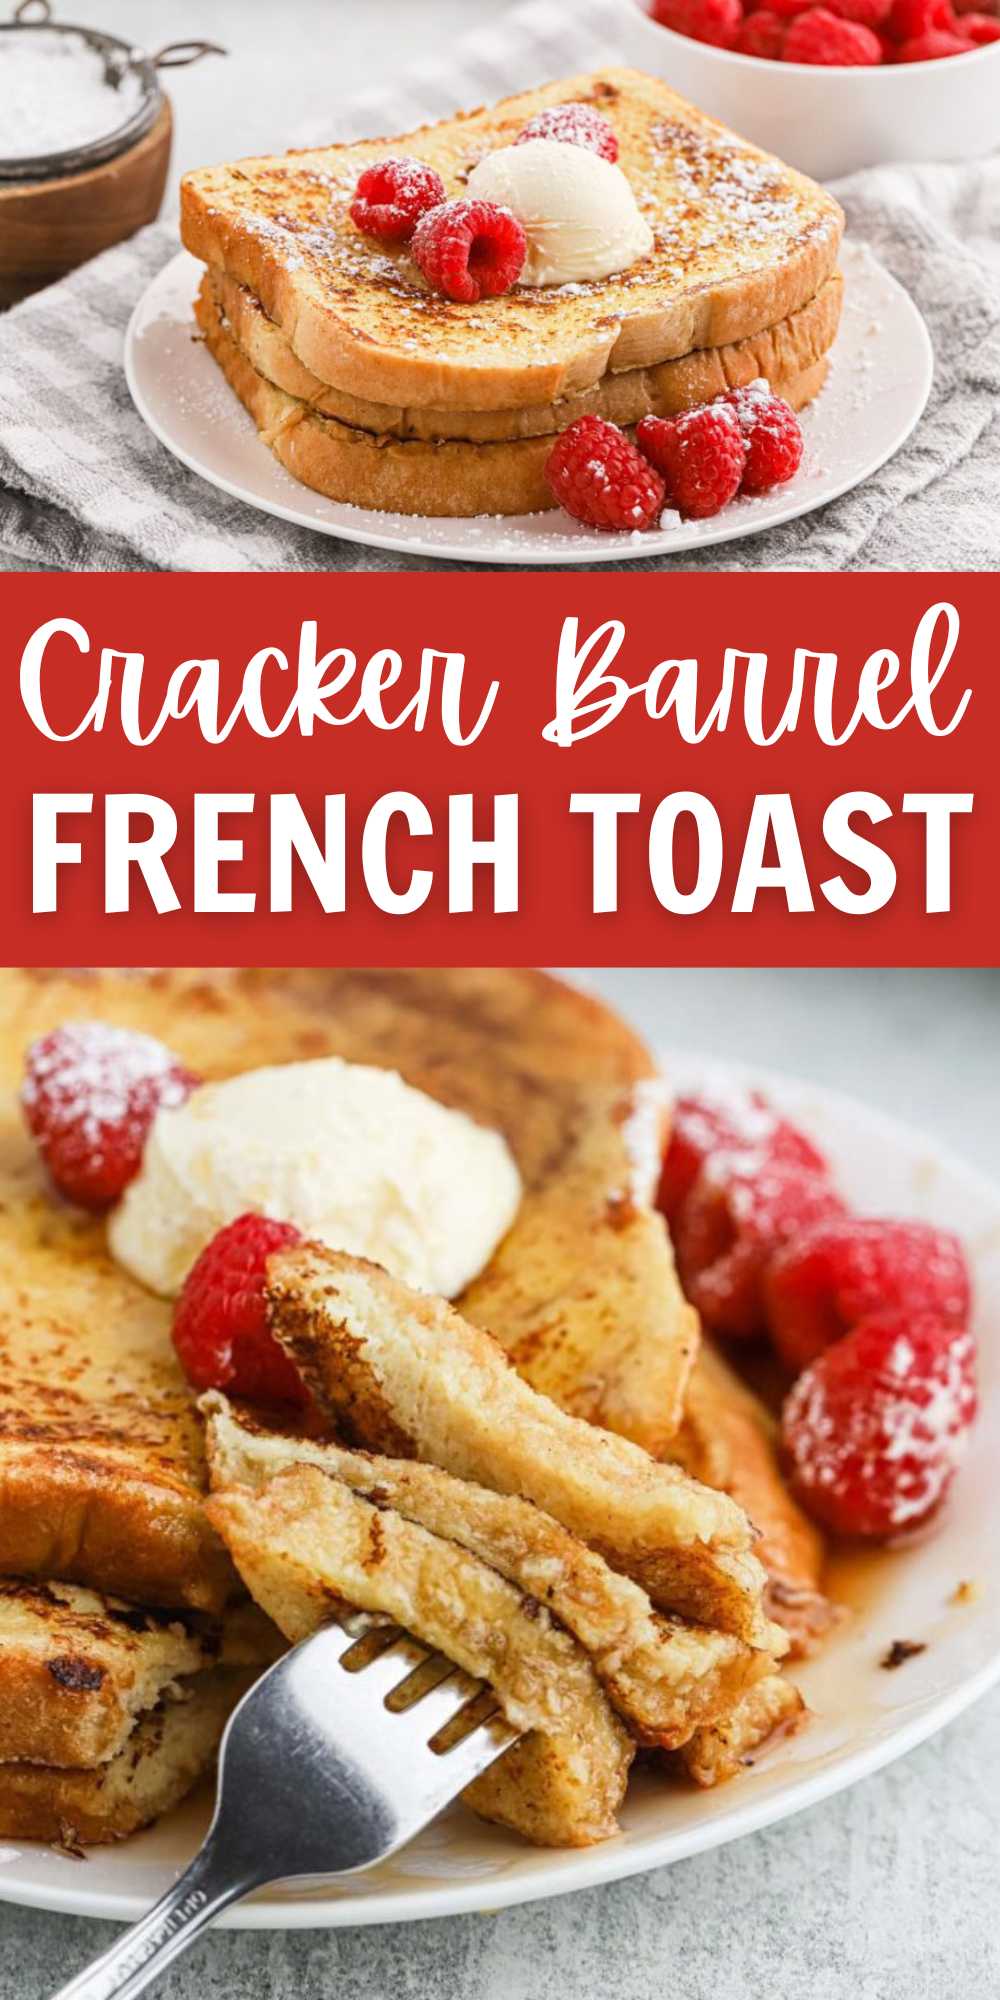 Cracker Barrel French Toast is a delicious copycat recipe that is tasty to serve for breakfast. Simple ingredients makes this a favorite. This quick and easy French Toast recipe brings everyone to the table. We usually make this recipe on the weekends but it is simple enough to make during the week. #eatingonadime #crackerbarrelfrenchtoast #crackerbarrelcopycatrecipes